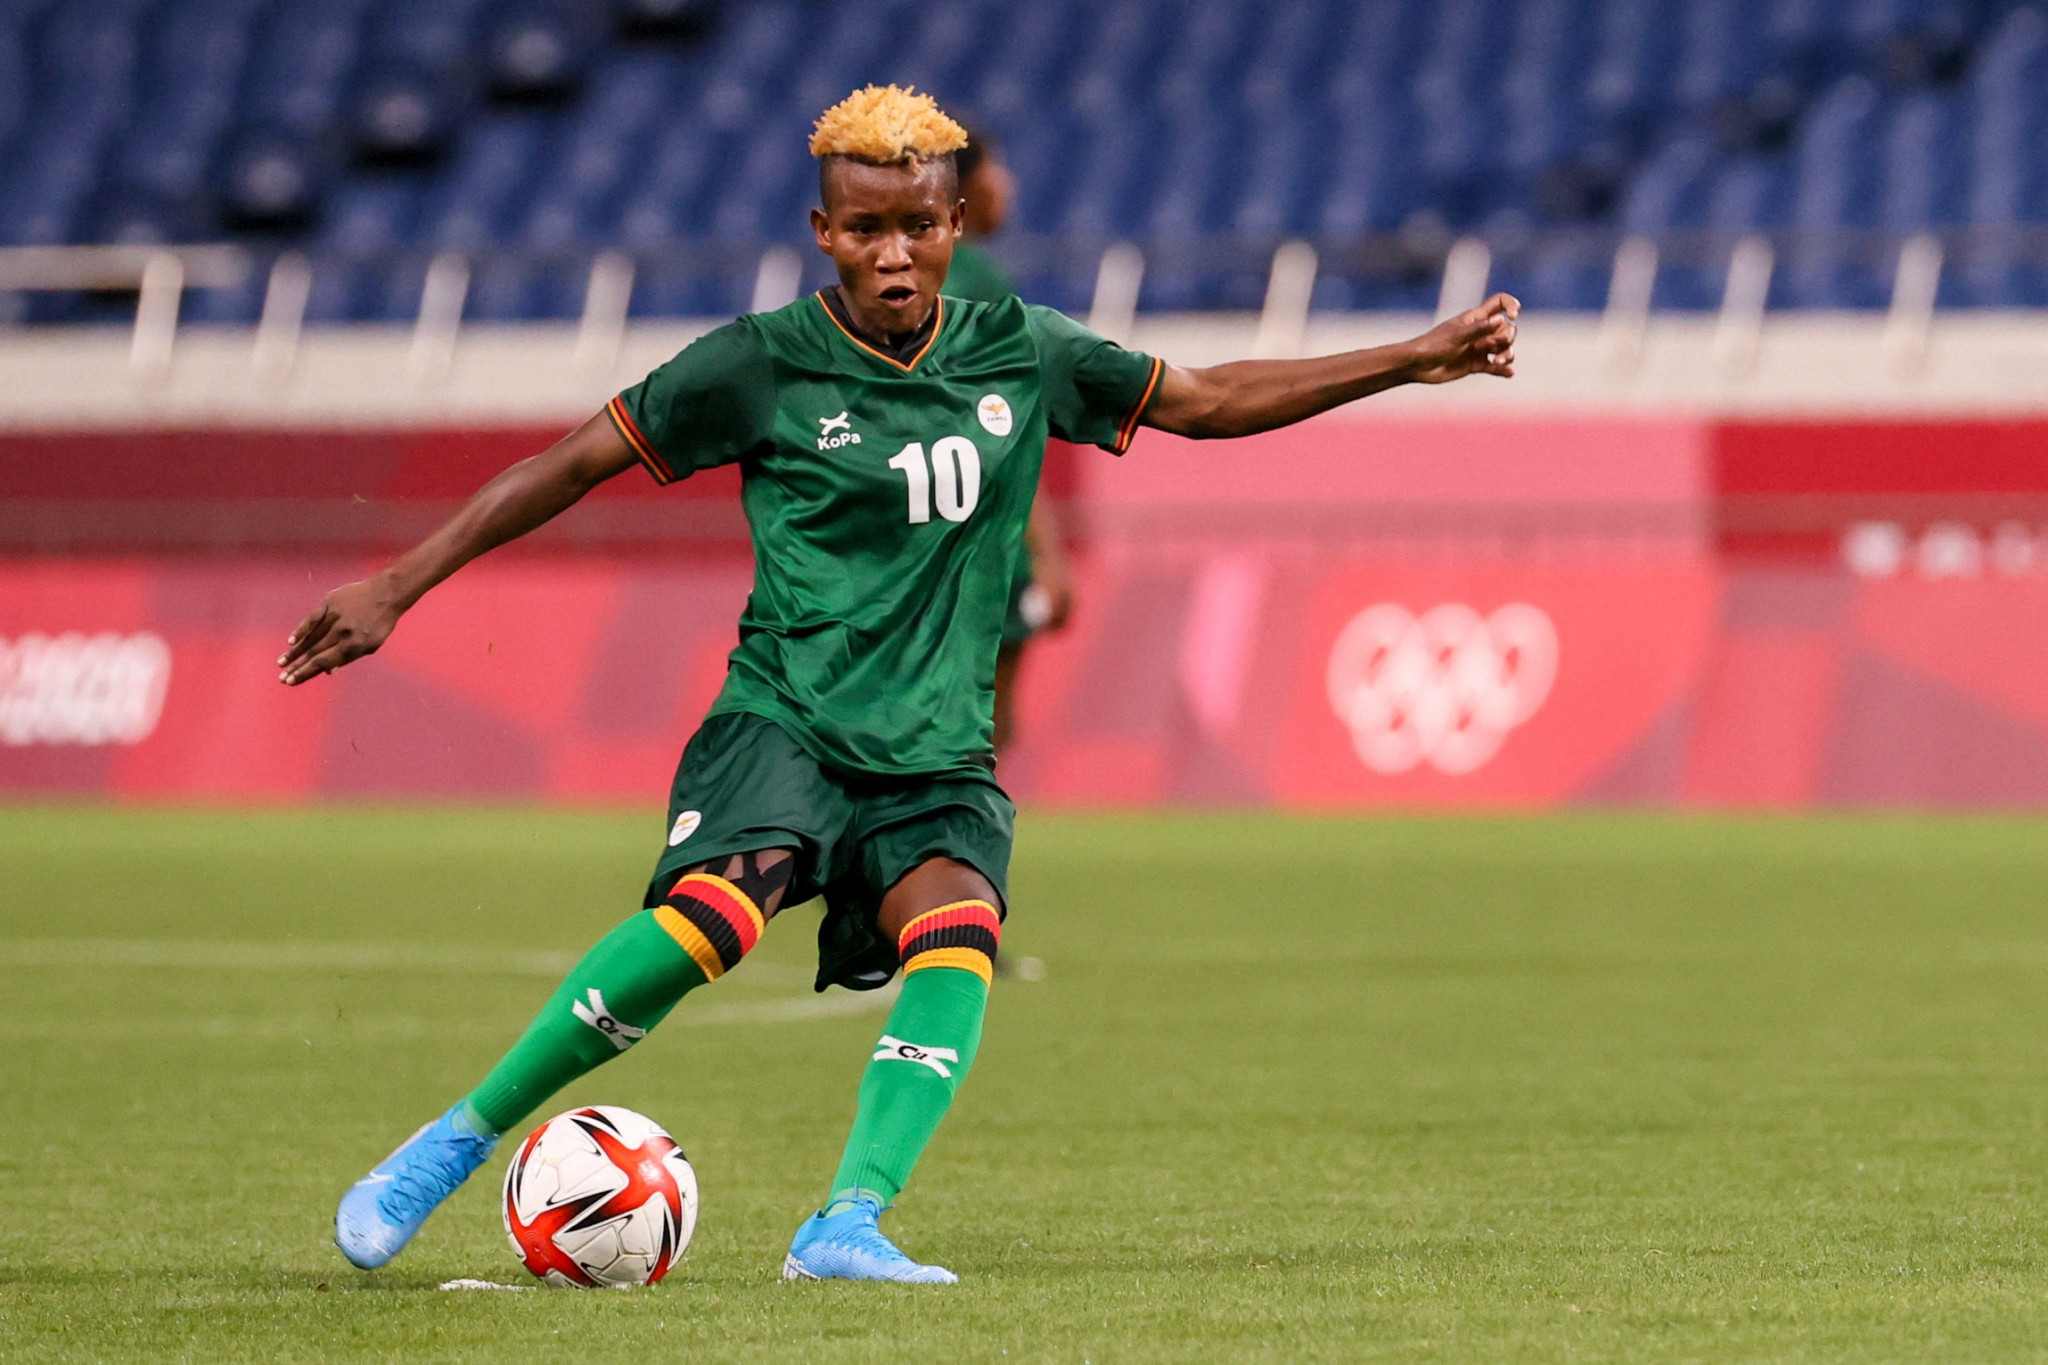 Grace Chanda netted twice in Zambia's 4-1 win over Togo ©Getty Images